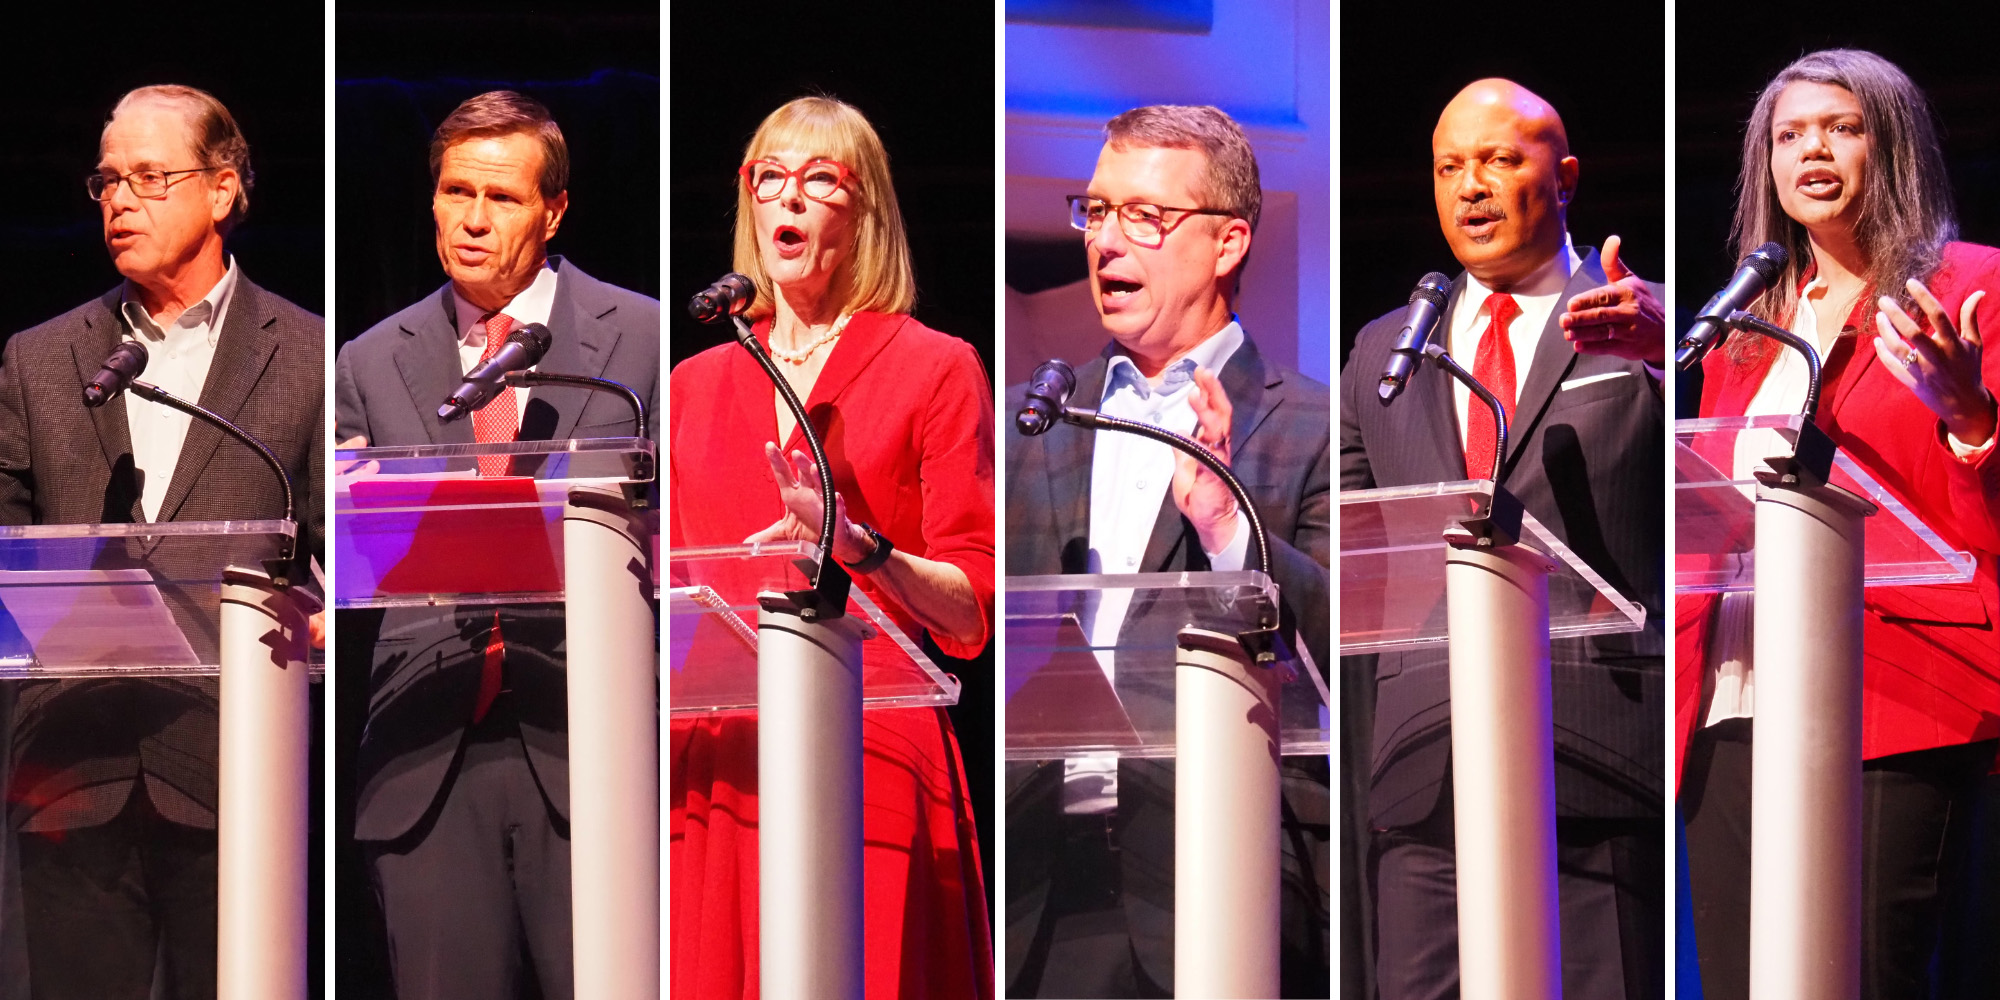 Indiana’s GOP candidates for governor address environmental issues